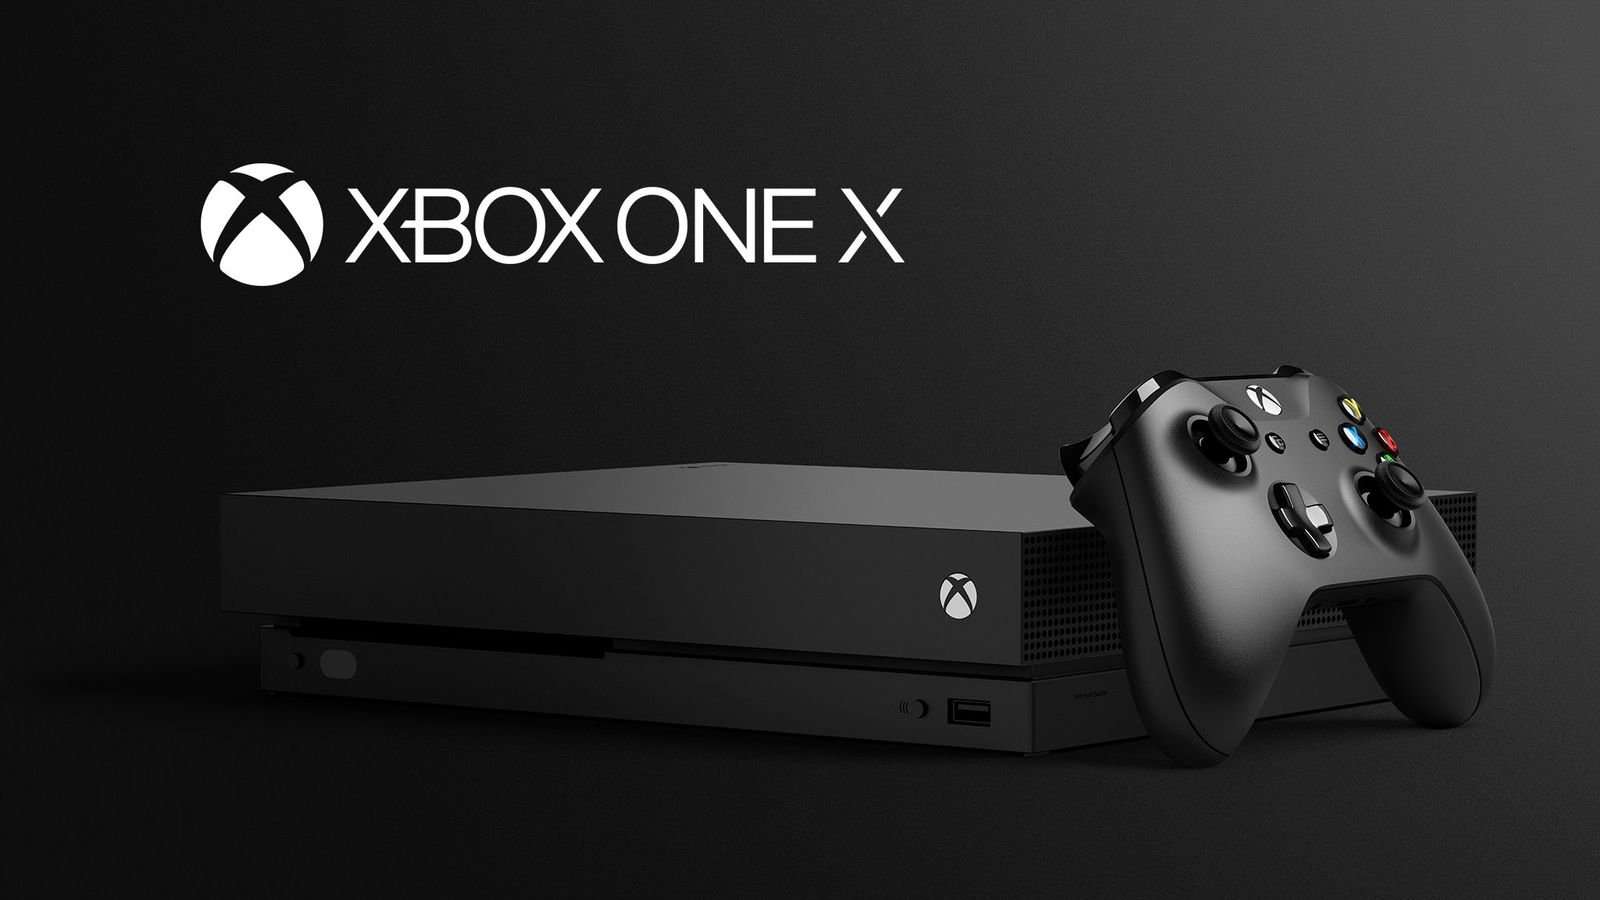 image for Xbox One X is Microsoft's next games console, arriving on November 7th for $499